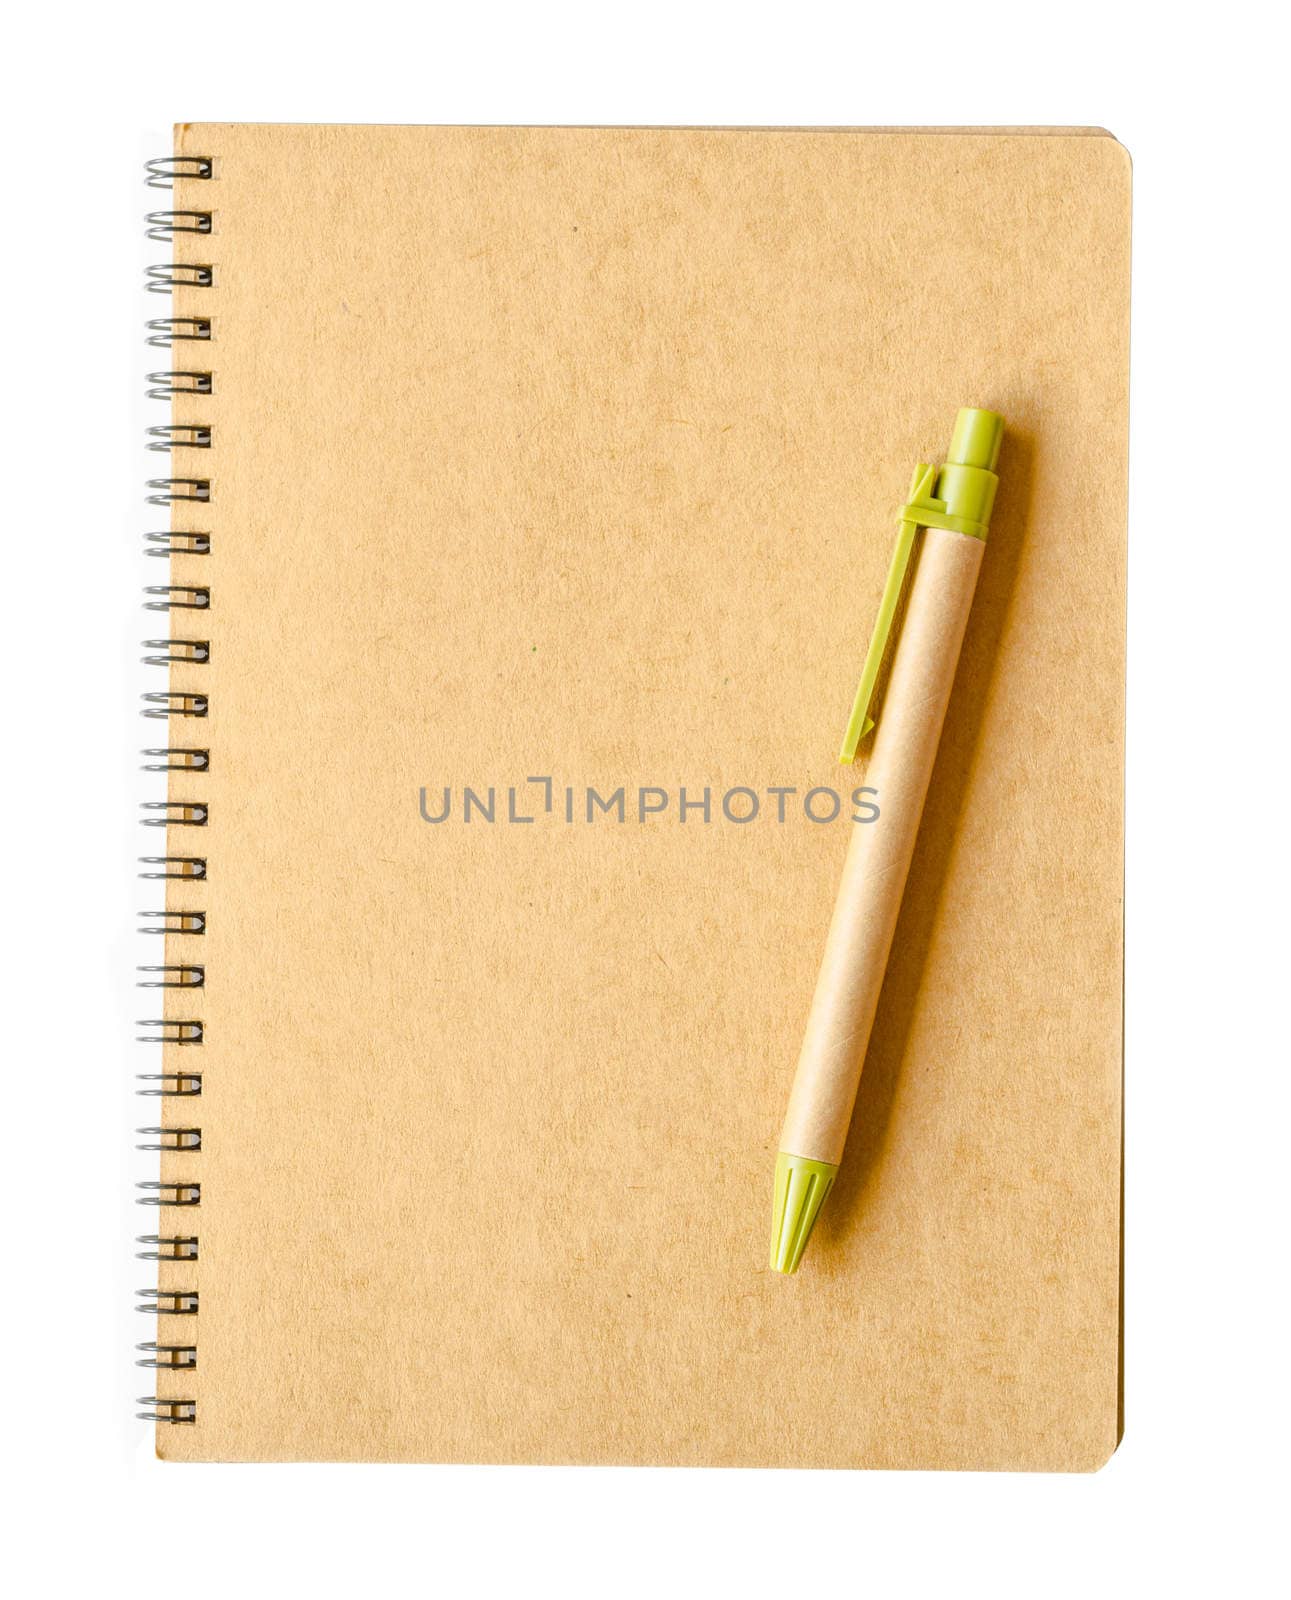 Recycle brown paper notebook and pen on white background.